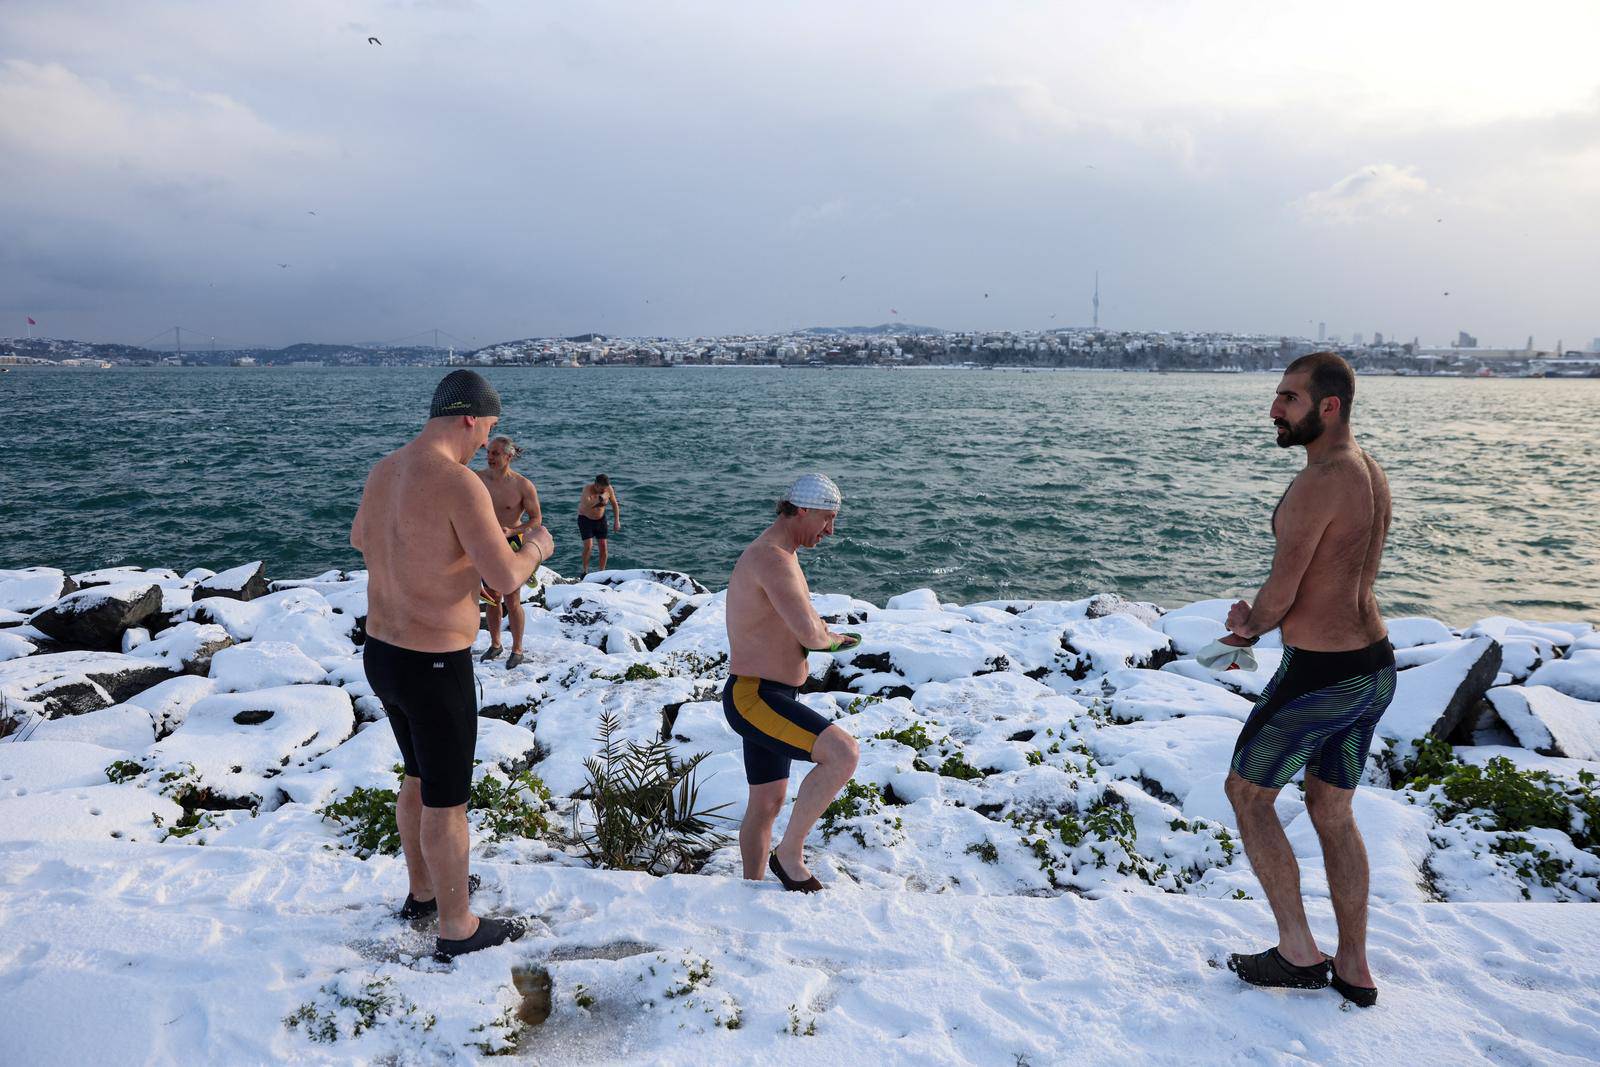 A group of swimmers warm-up before they dive into the chilly waters of the Bosphorus during a snowy day in Istanbul